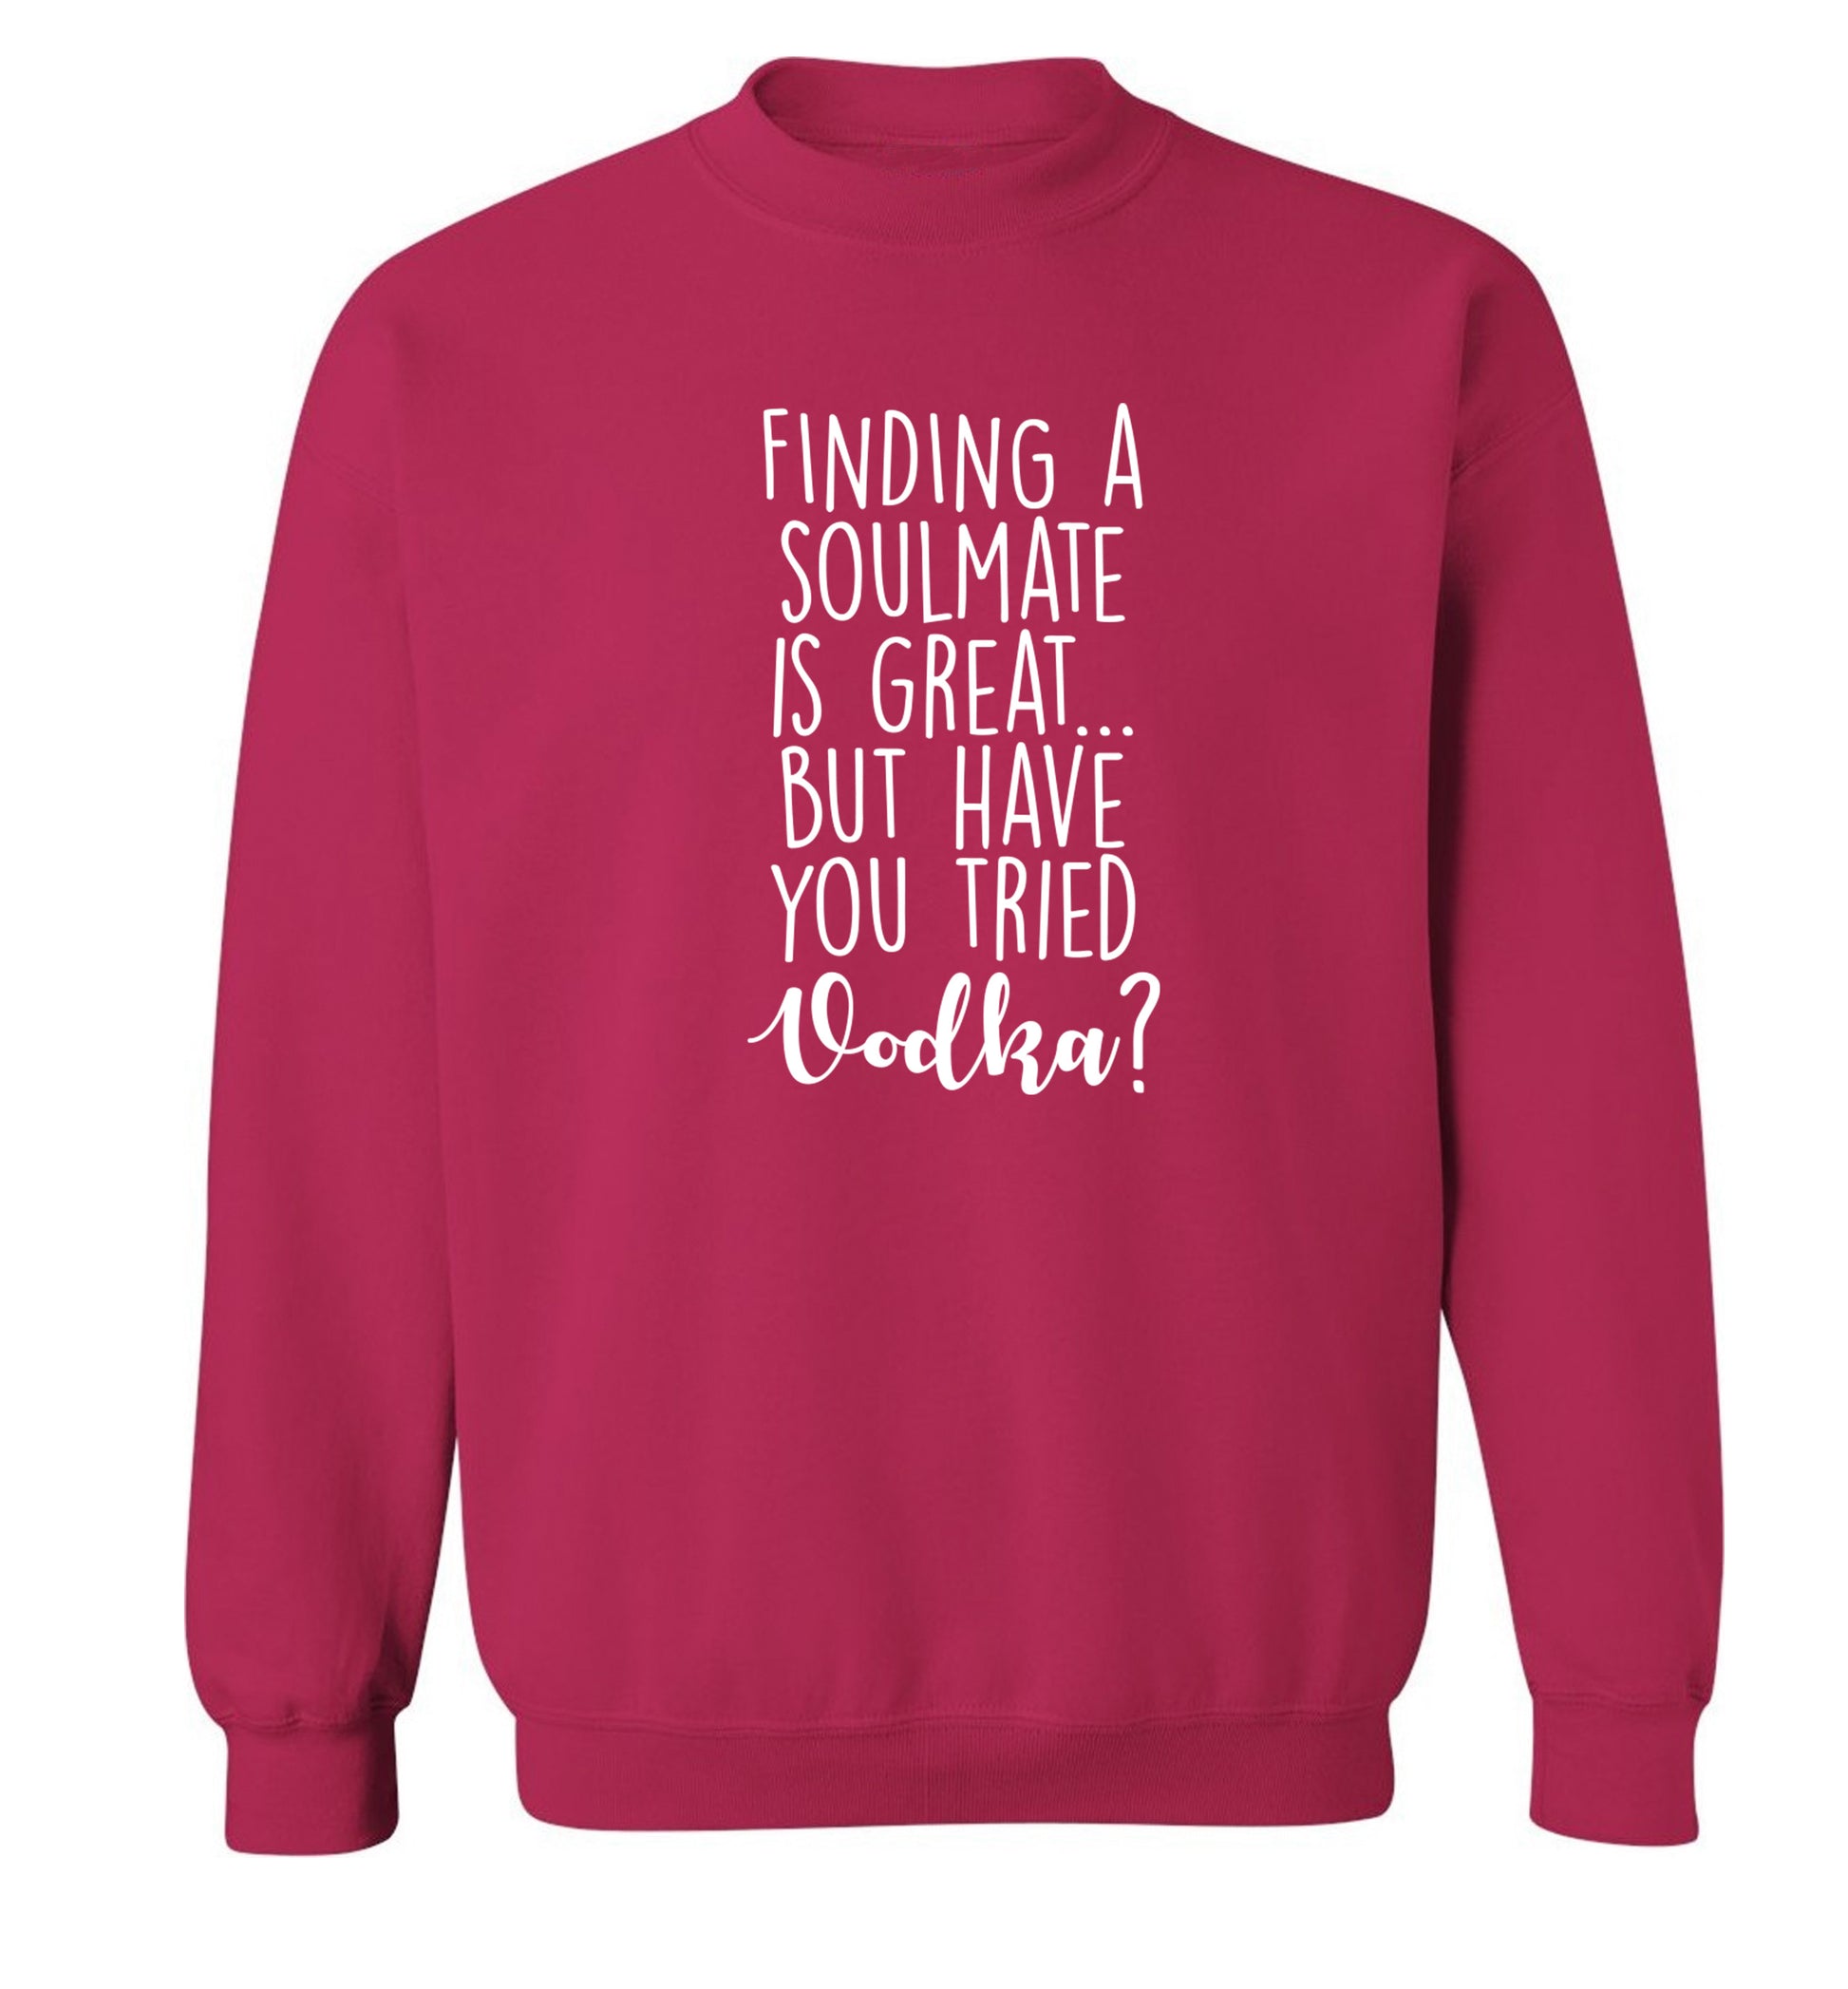 Finding a soulmate is great but have you tried vodka? Adult's unisex pink Sweater 2XL